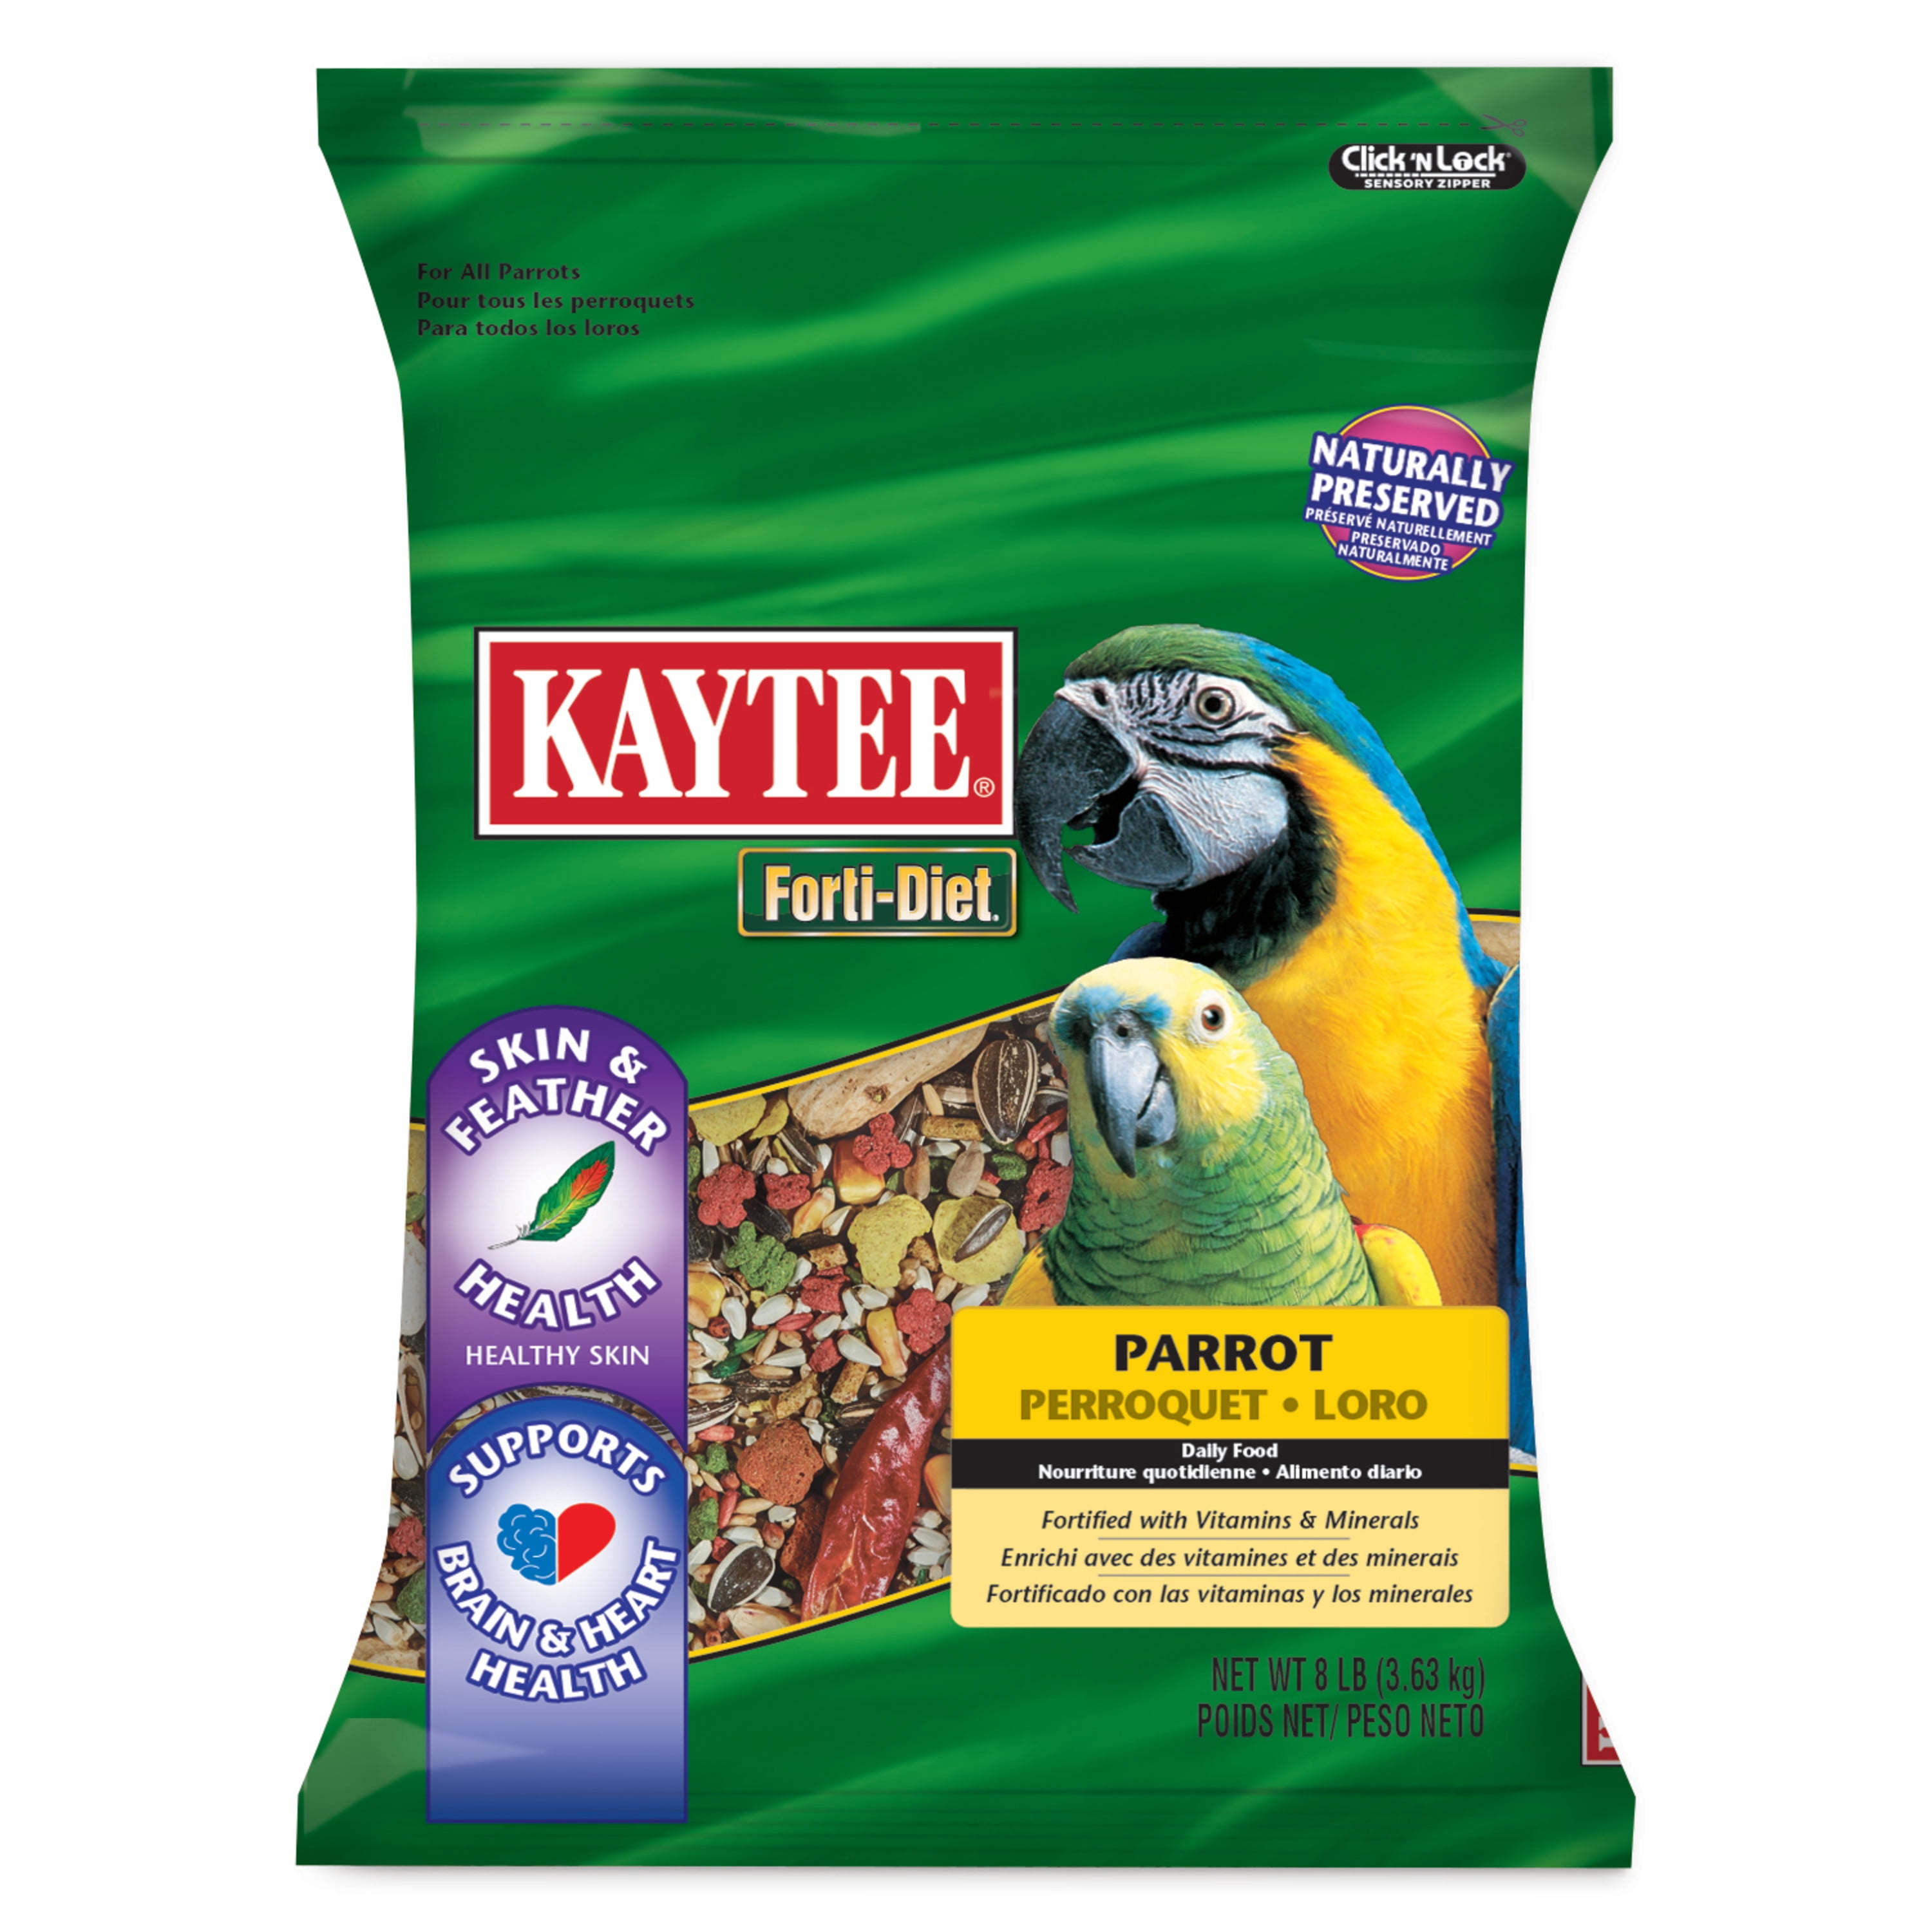 Kaytee Forti-Diet Parrot Food, Feather Health, 8 lb